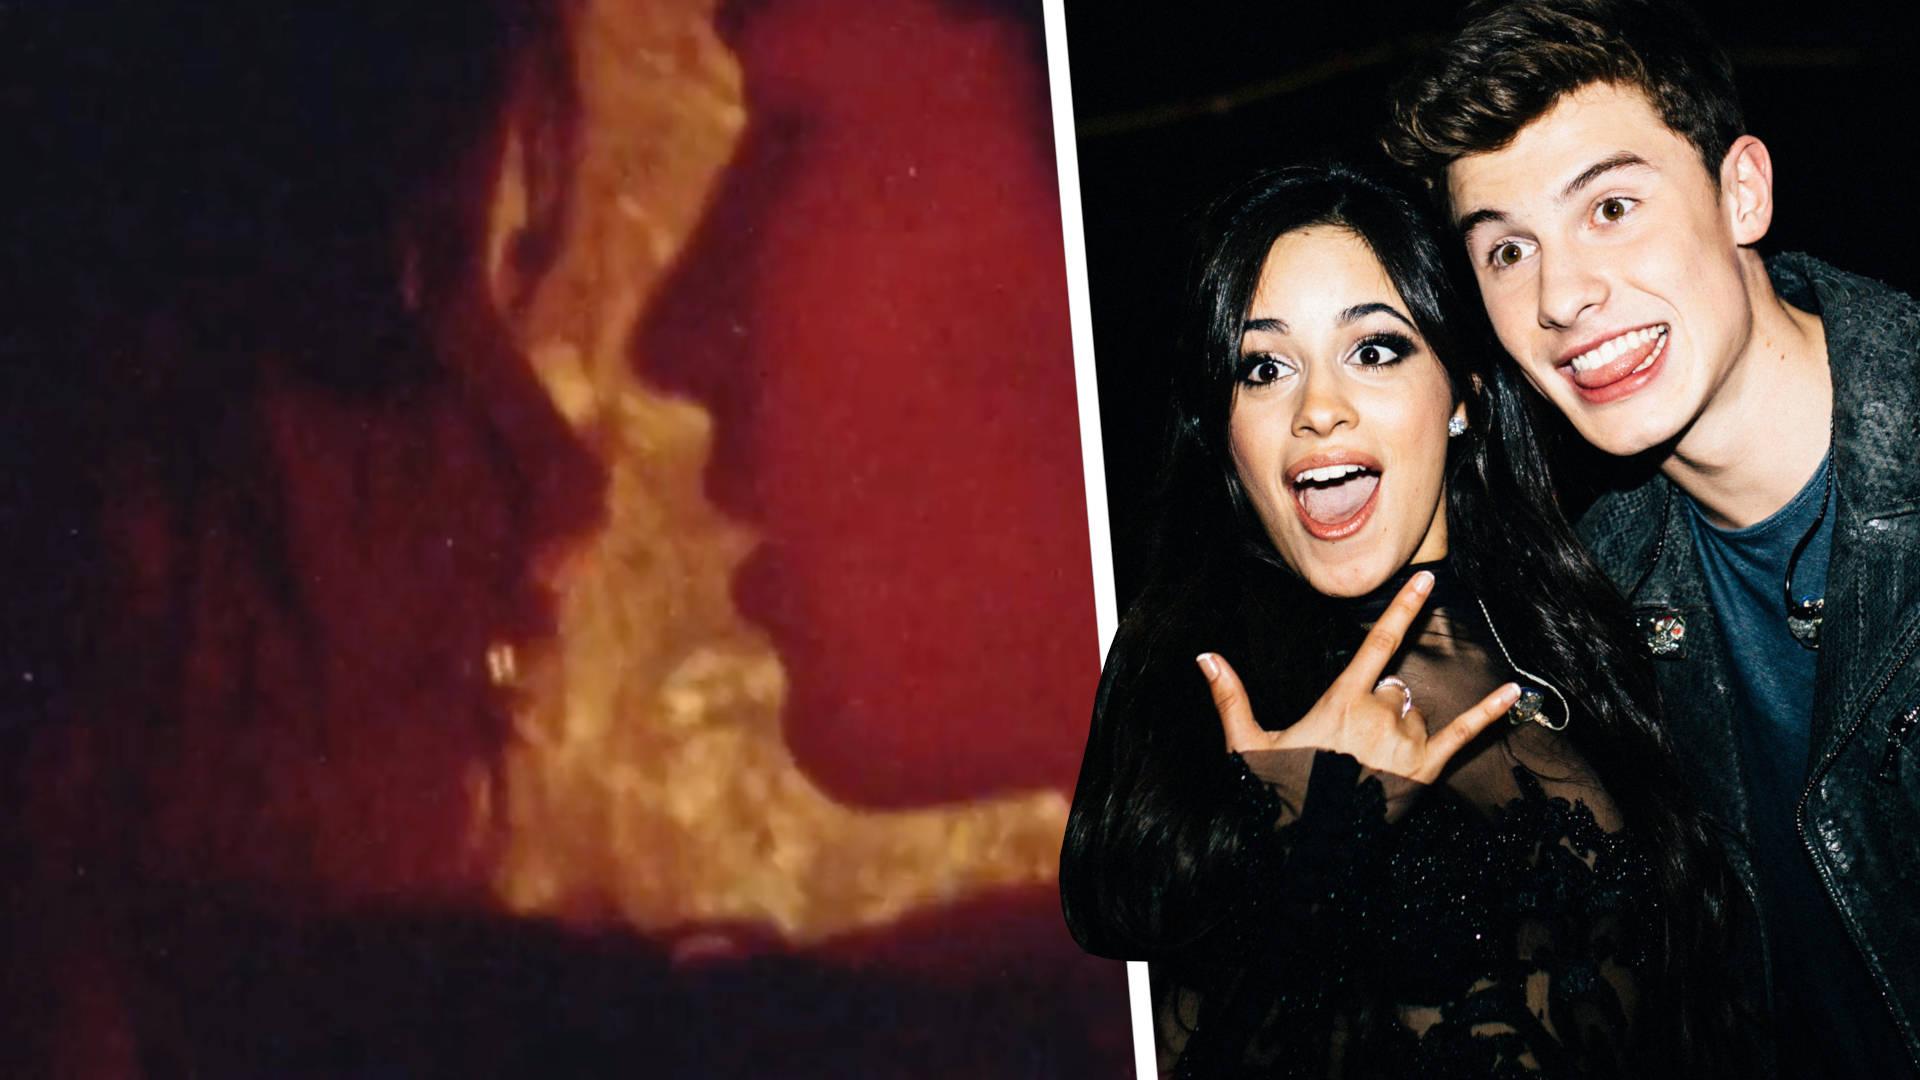 Shawn Mendes makes out with Camila Cabello in 'Señorita' music